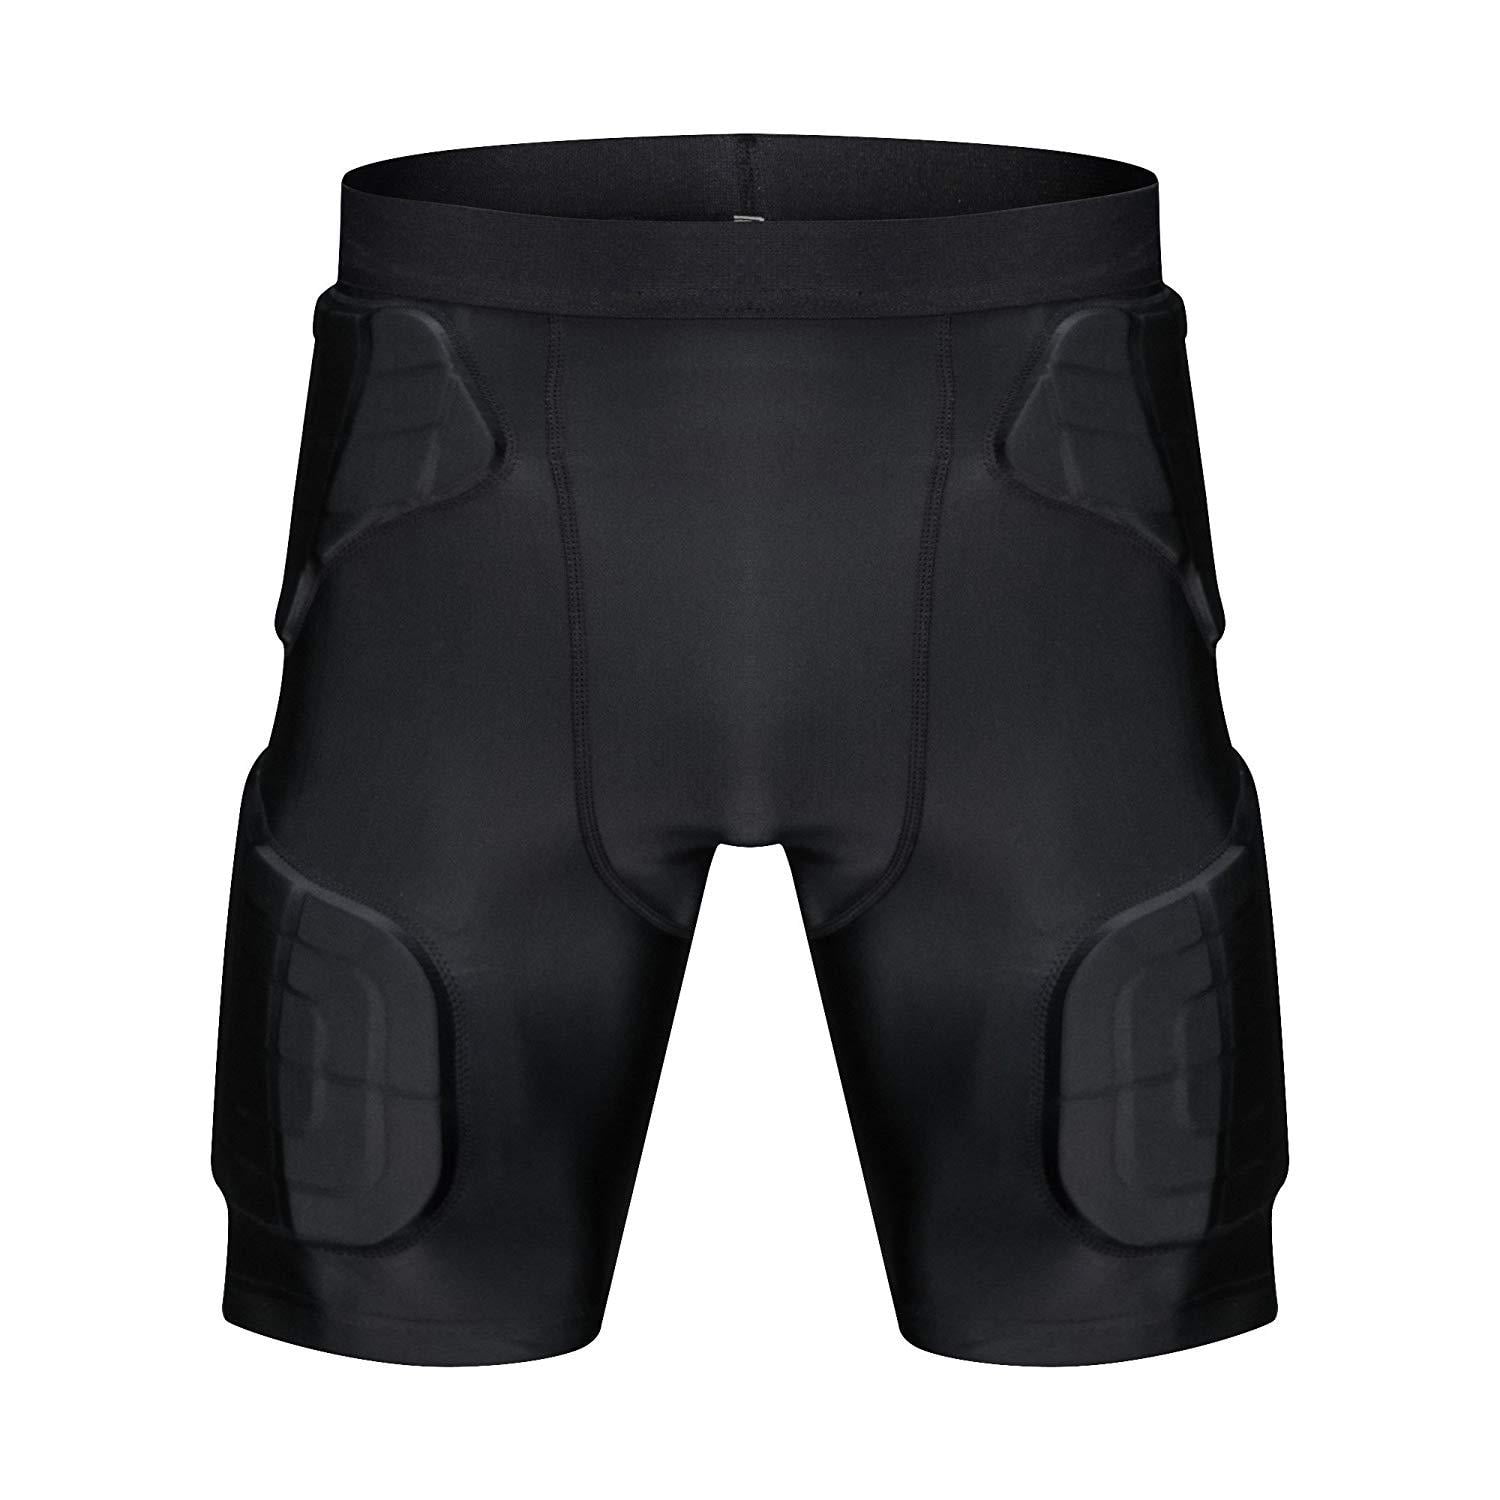 XL Details about    Soccer Goalkeeper Shorts Padded HIGH 5 Adult Black 